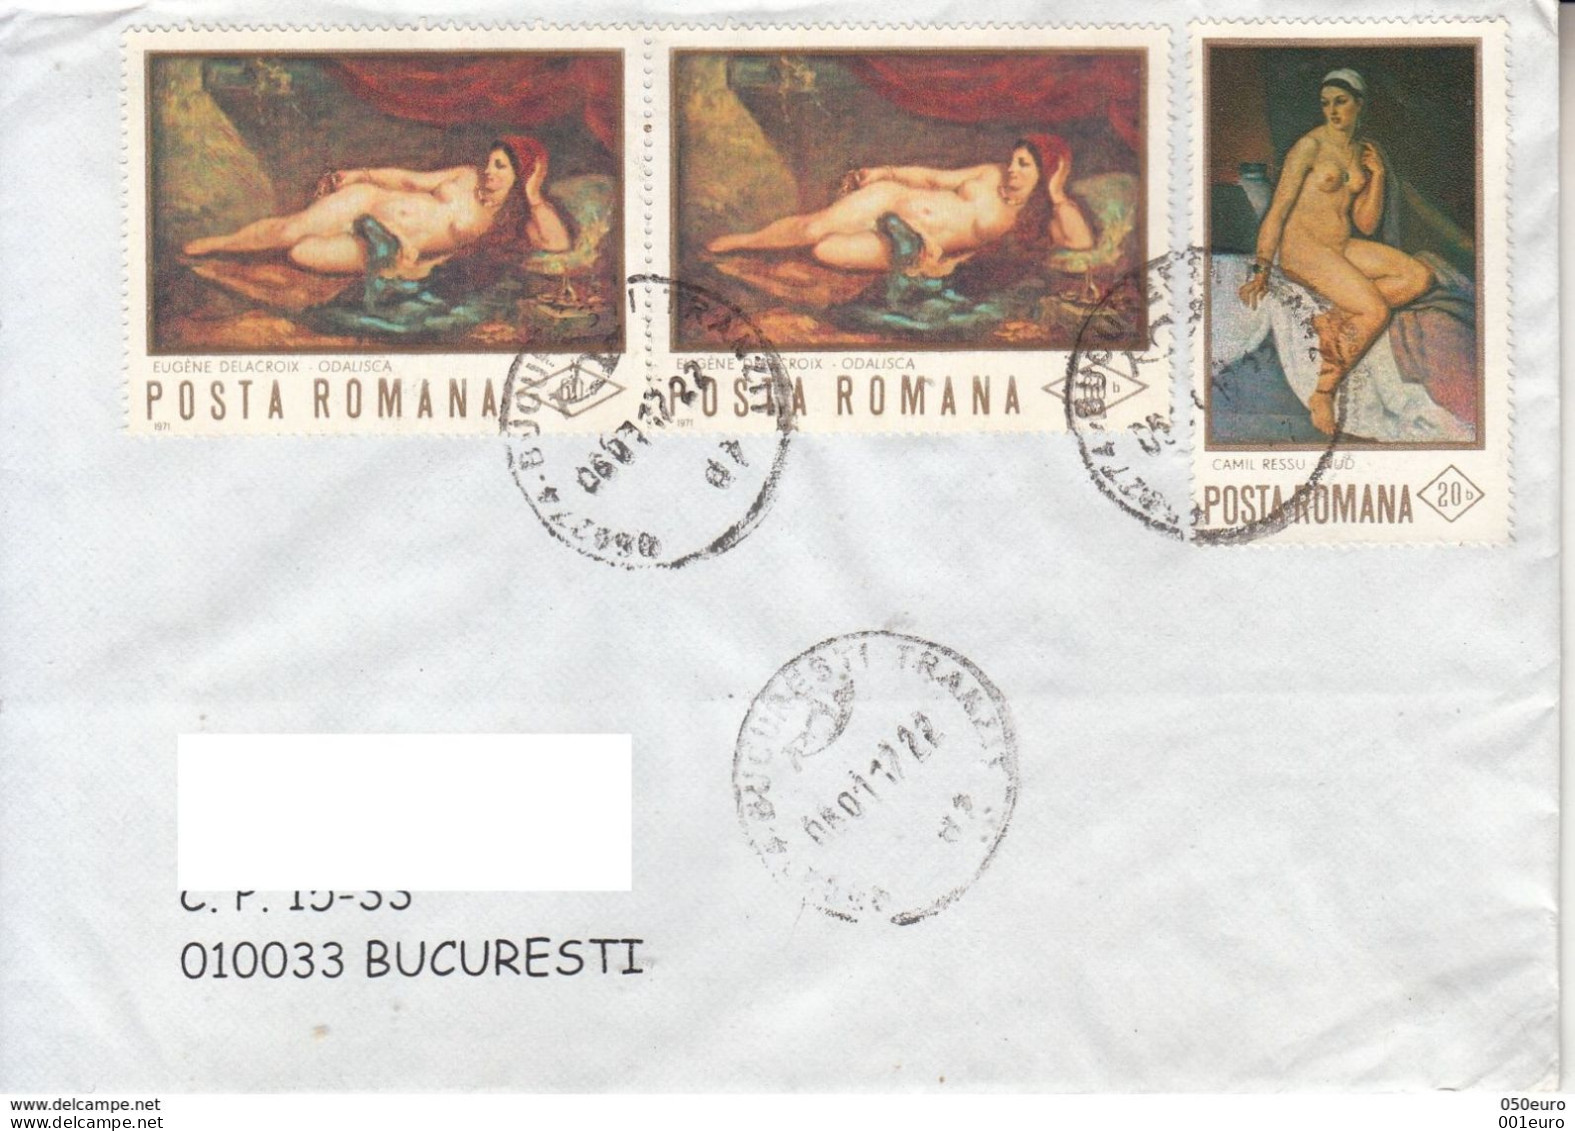 # ROMANIA : Lot Of 4 Covers Circulated As Domestic Letters In Romania #1043364880 - Registered Shipping! - Storia Postale